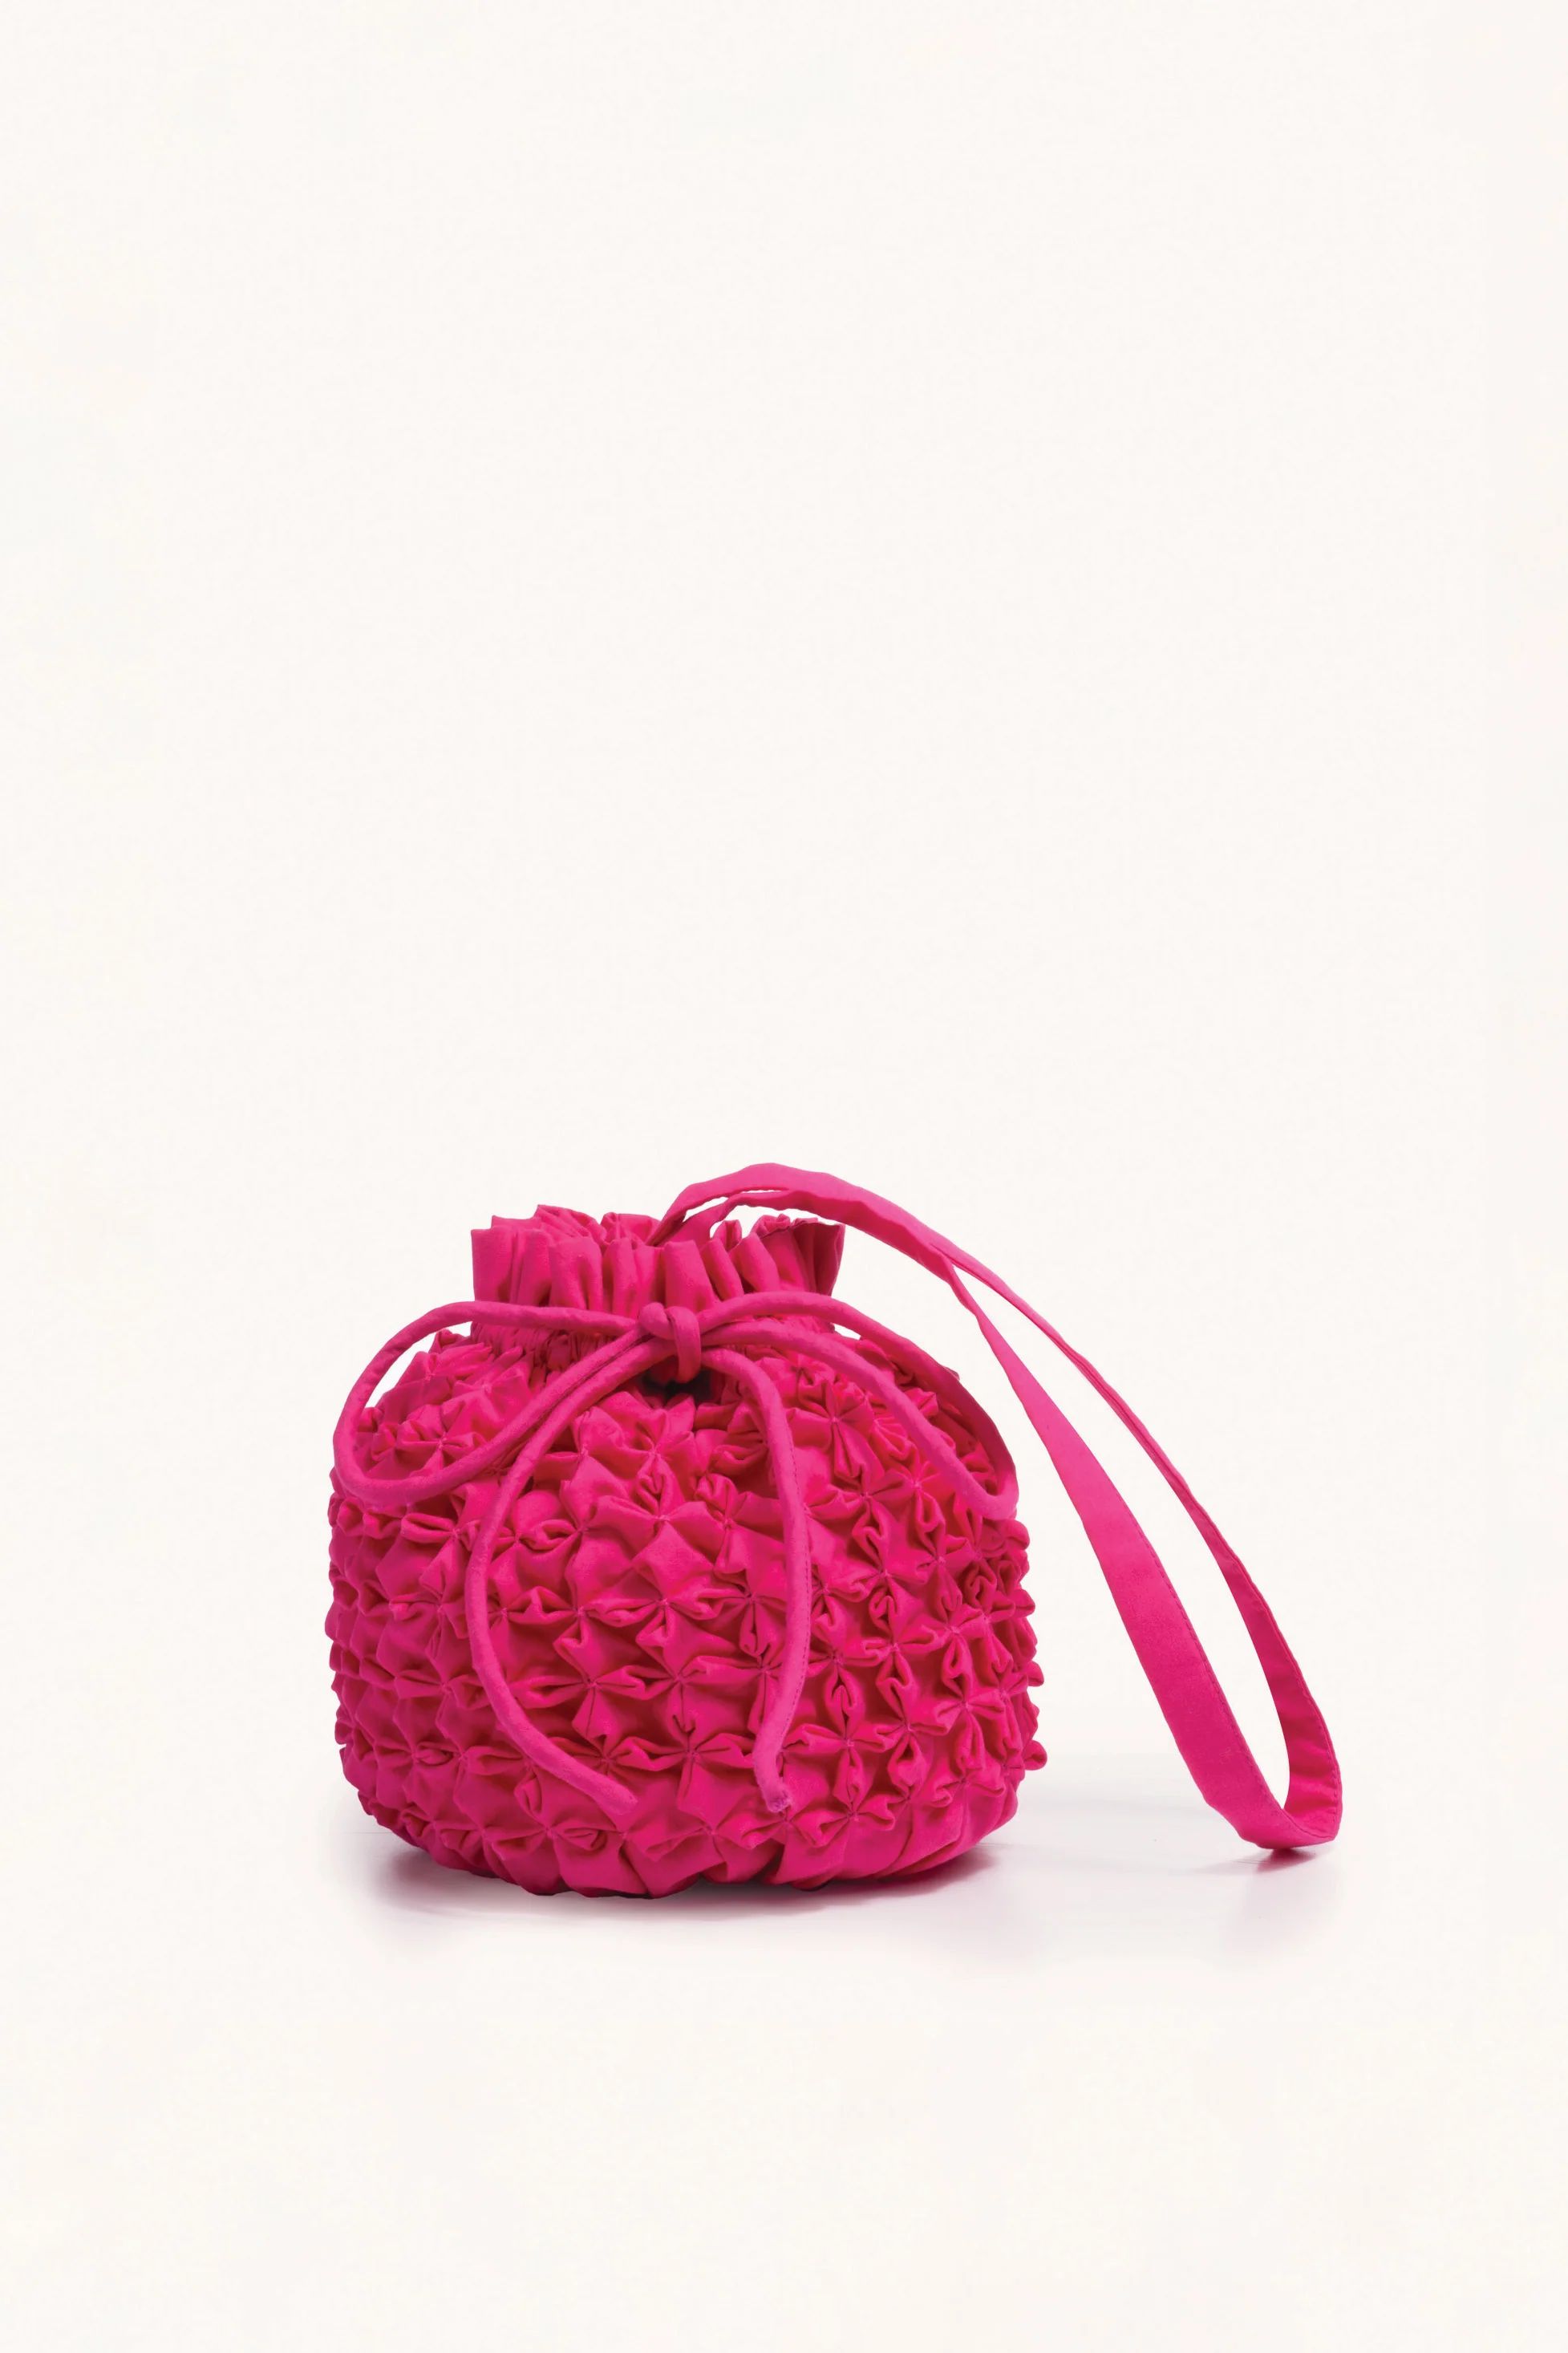 Deco Pouch in Magenta | Merlette NYC